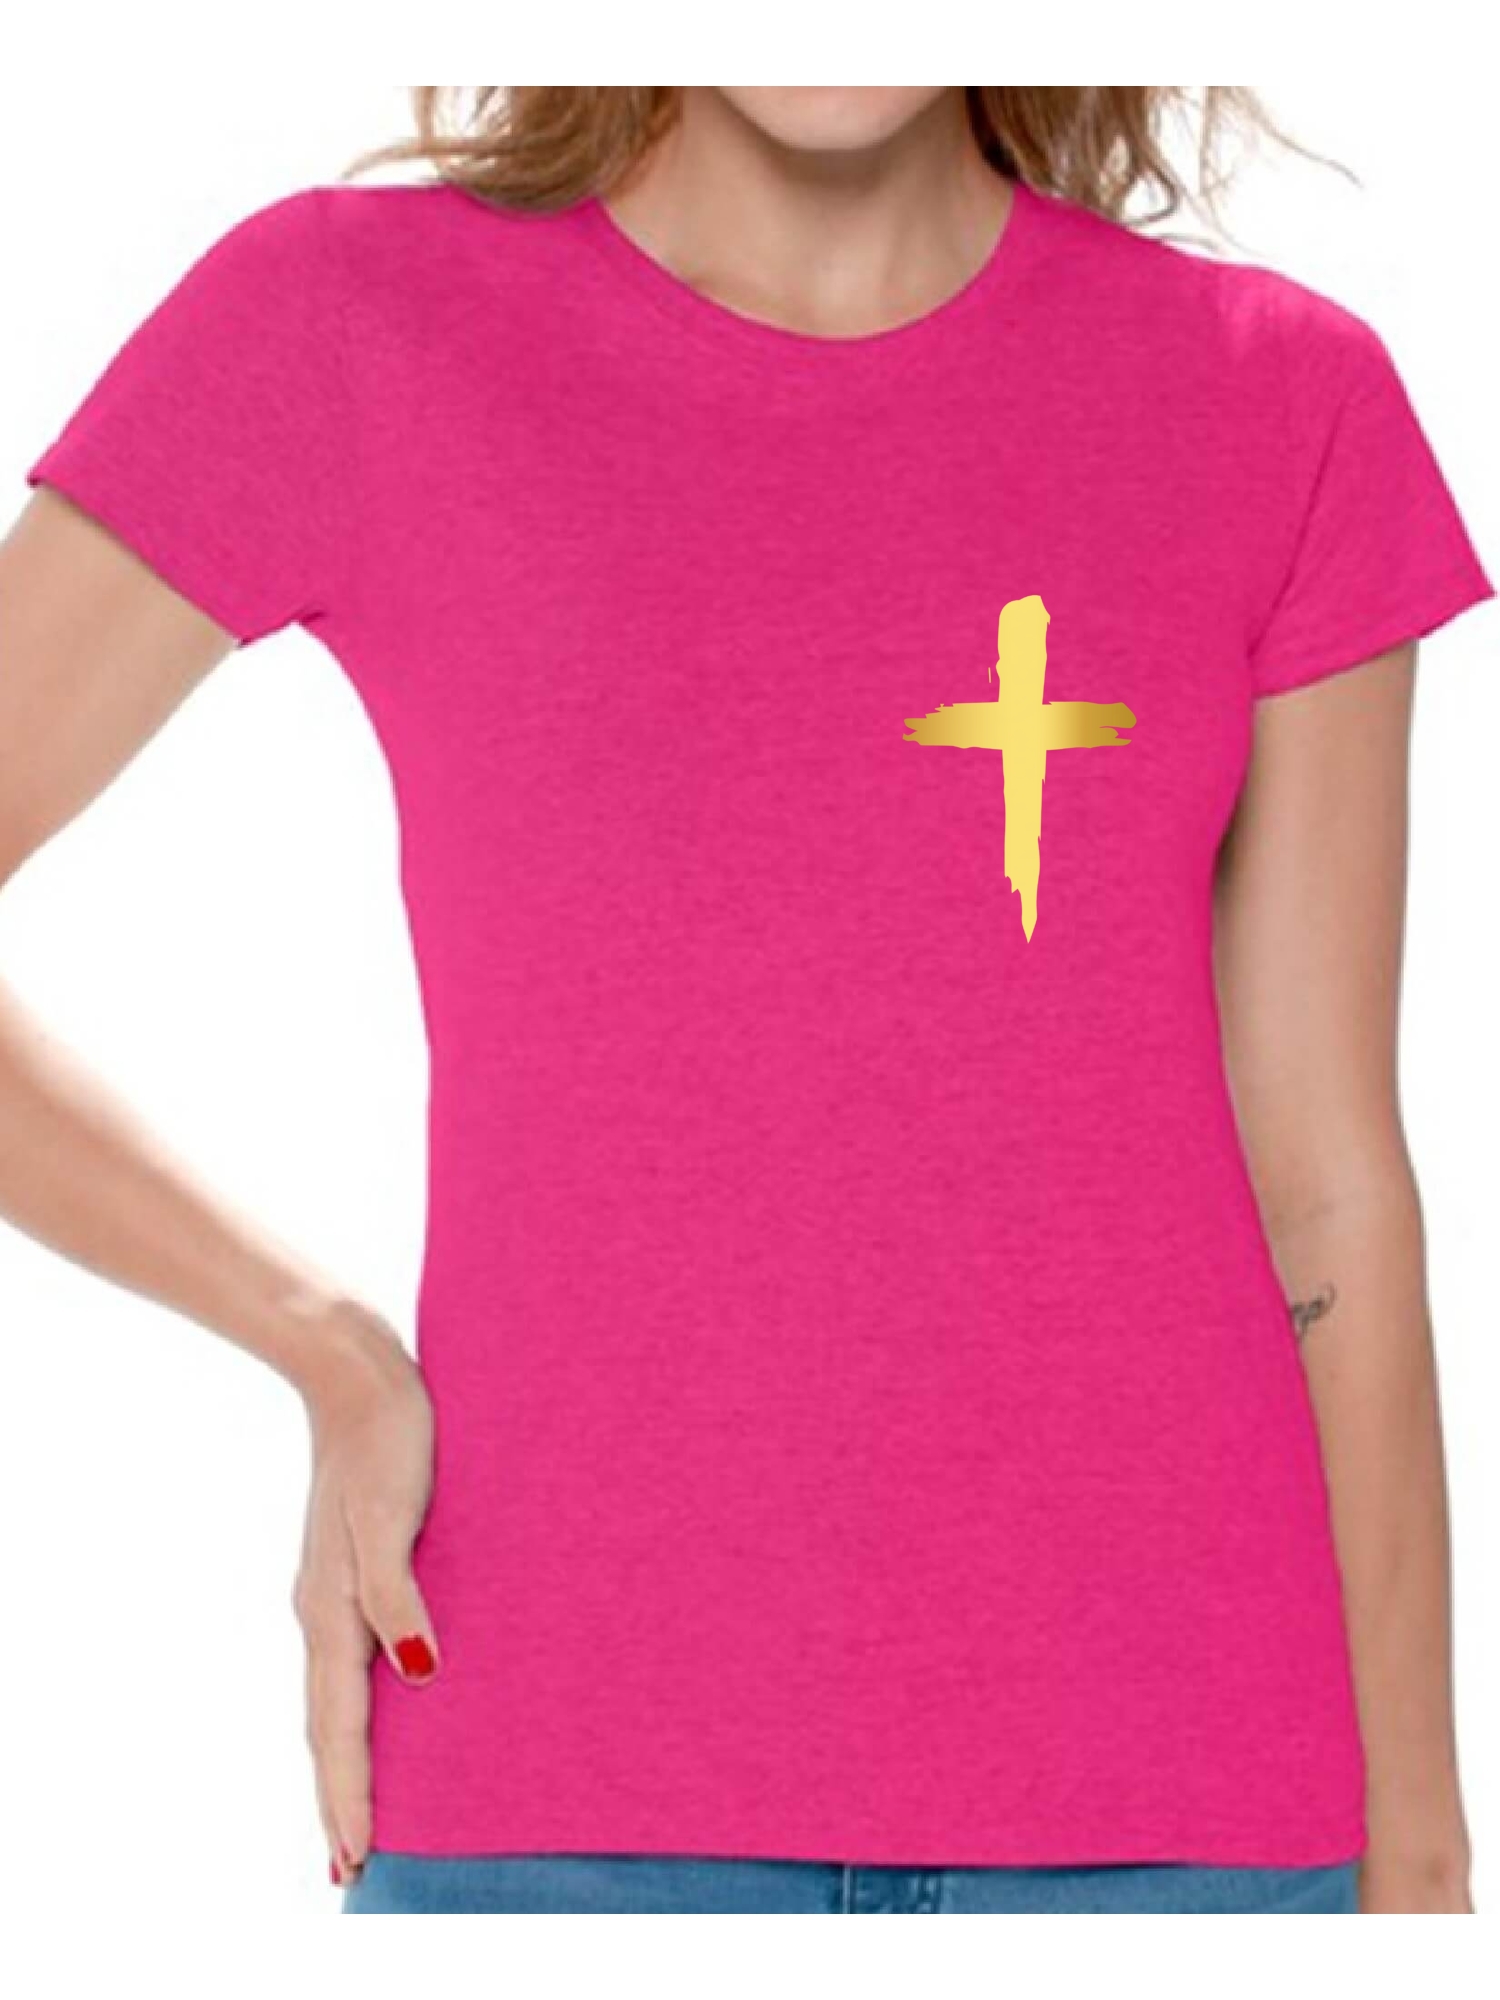 Awkward Styles Golden Cross Shirt for Women Christian Cross Clothes for Ladies Following Jesus Womens T-Shirt Christian Gifts Jesus Shirts Jesus Cross Clothing Jesus T Shirt for Her Cross Ladies Shirt - image 1 of 4